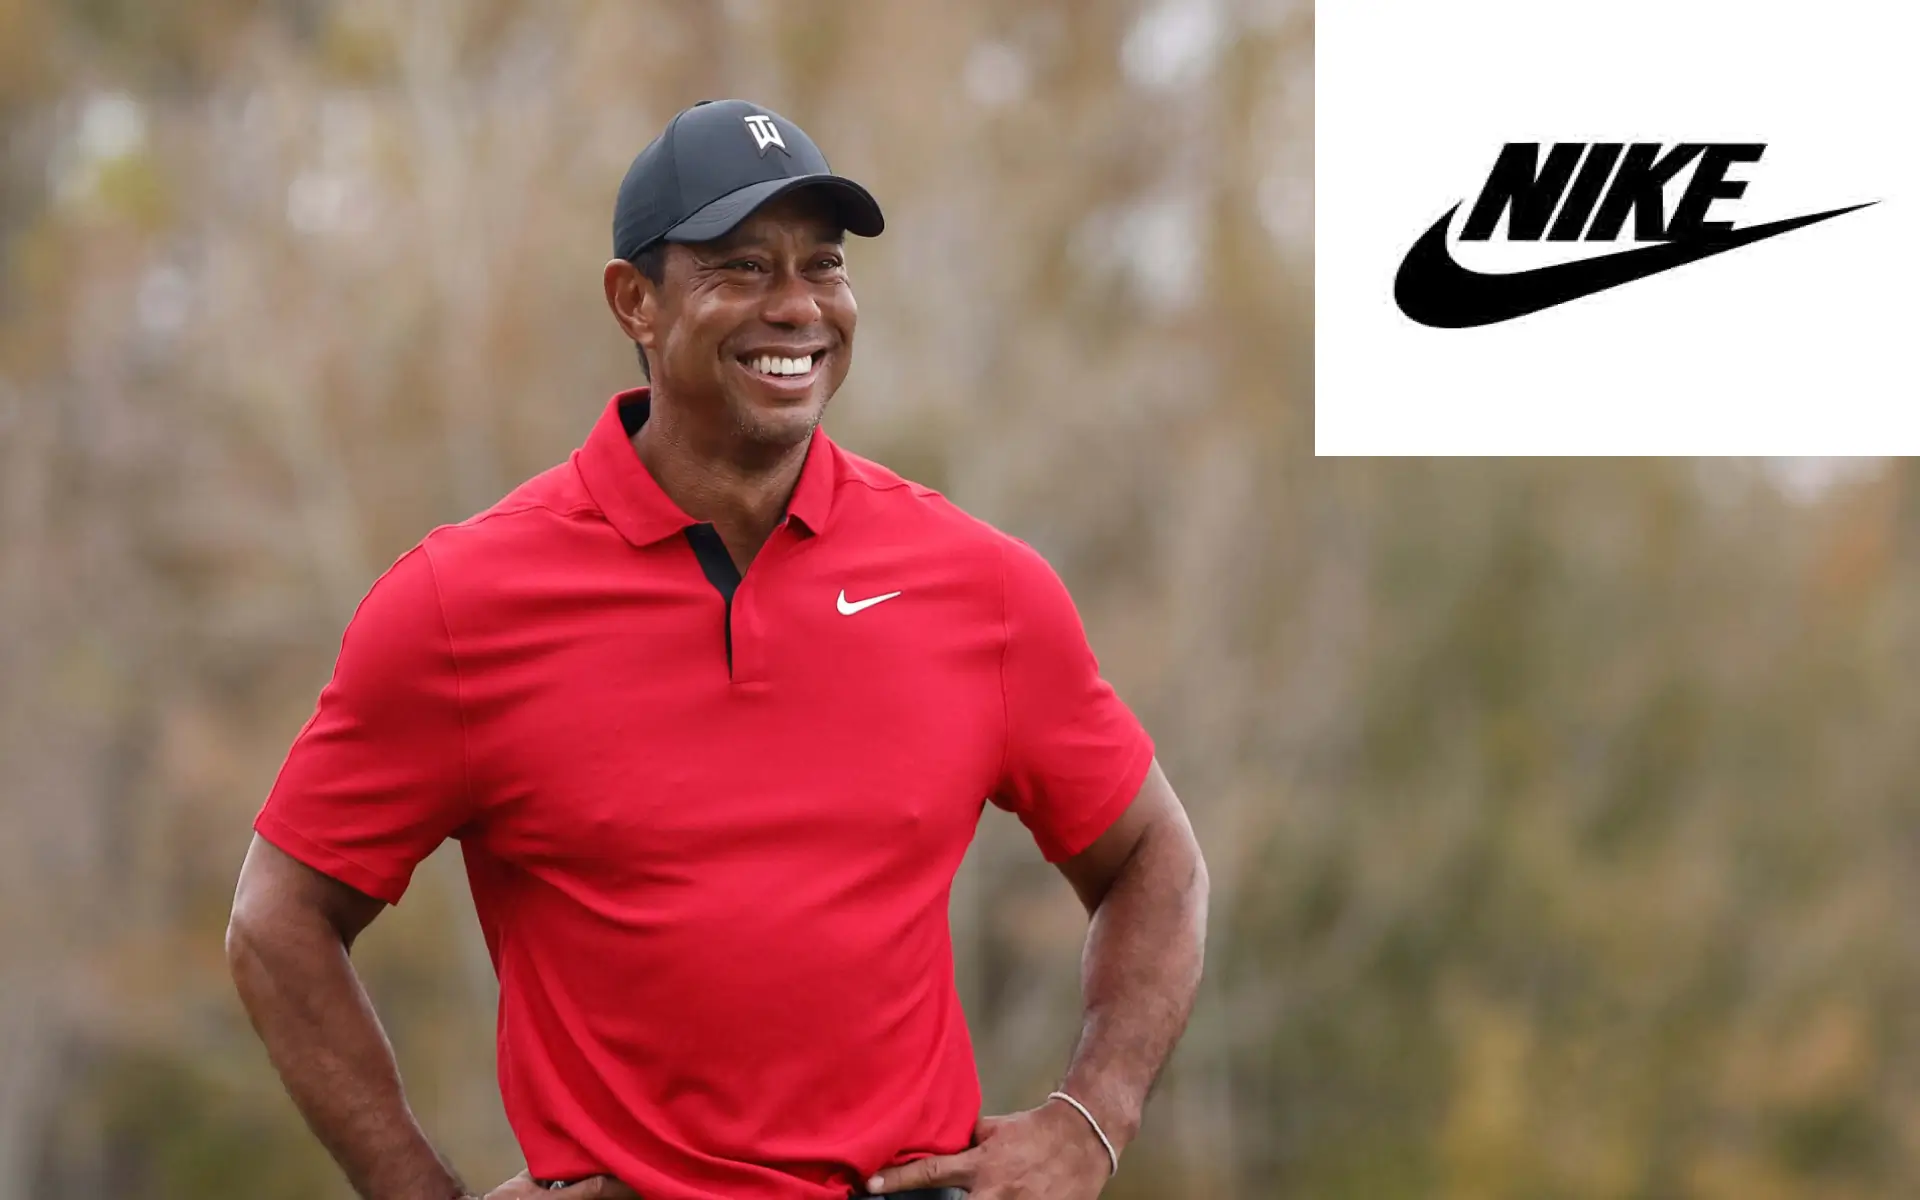 Tiger Woods Ends 27-Year Partnership with Nike: What’s Next for the Golf Legend?